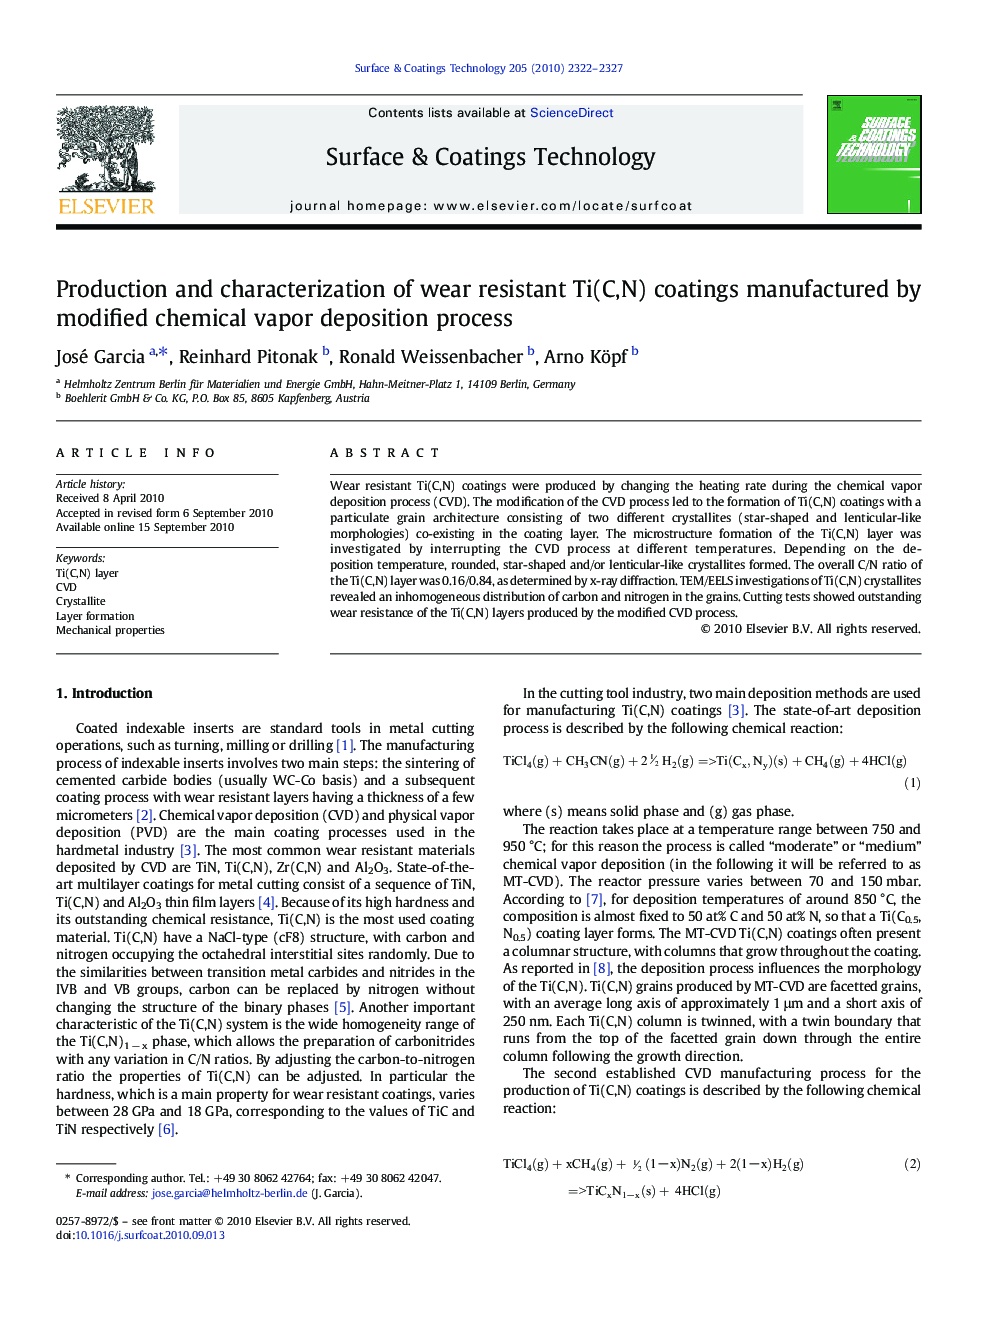 Production and characterization of wear resistant Ti(C,N) coatings manufactured by modified chemical vapor deposition process